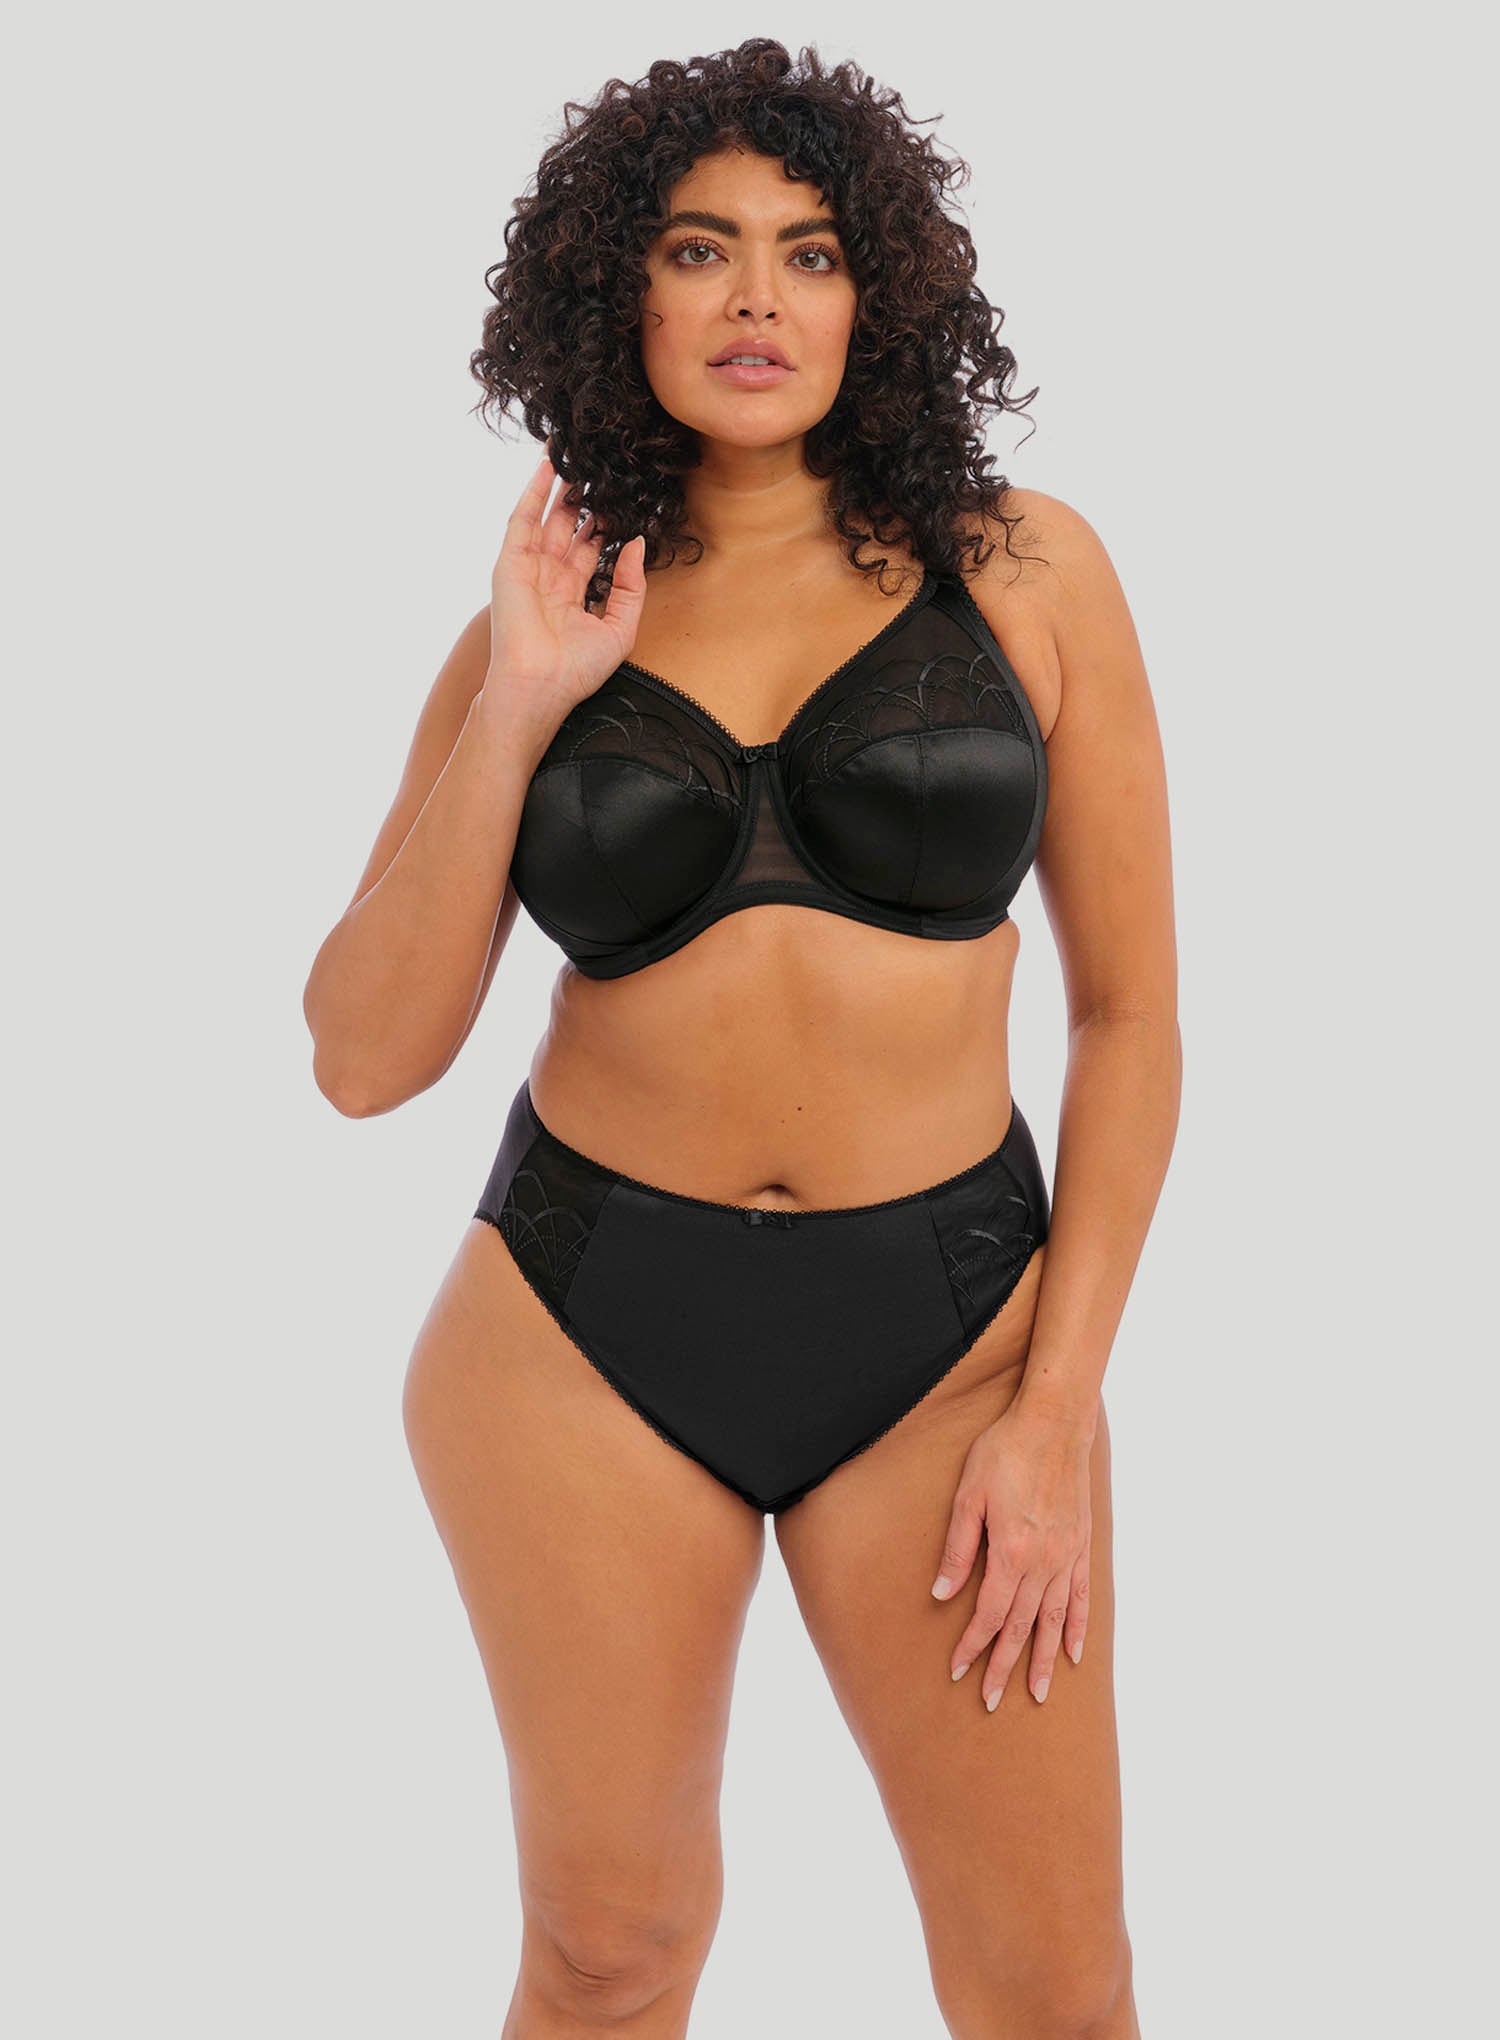 Elomi Womens Plus-Size Cate Underwire Full Cup Banded Bra